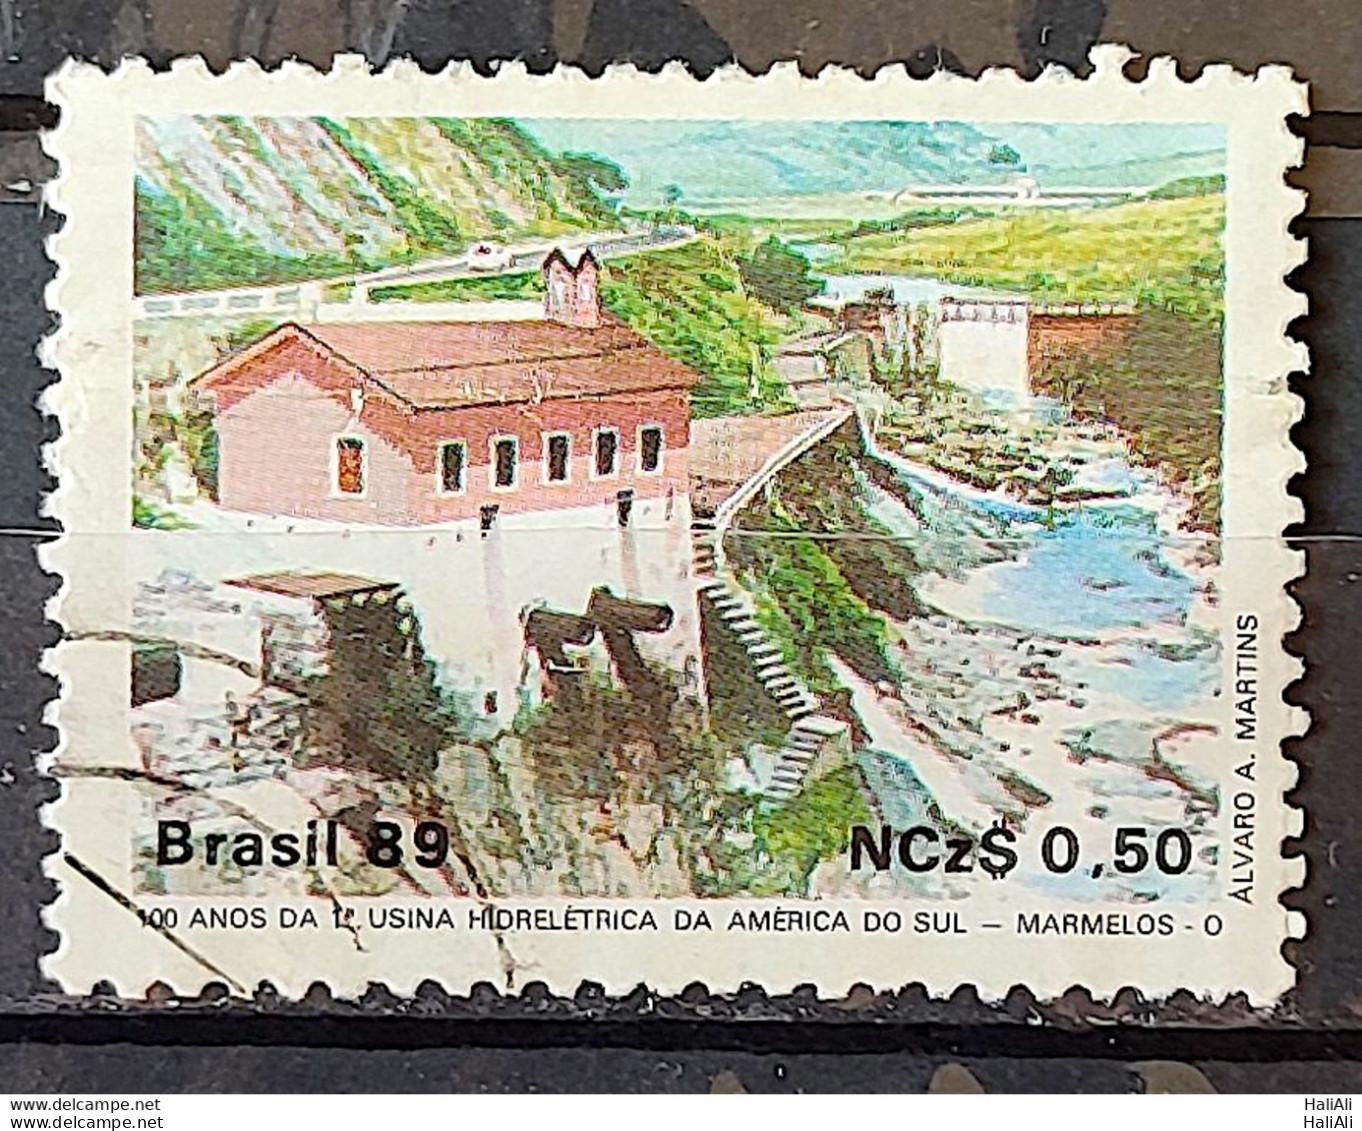 C 1644 Brazil Stamp 100 Years Hydroelectric Marmelos Energy Electricity Juiz De Fora 1989 Circulated 24 - Usados